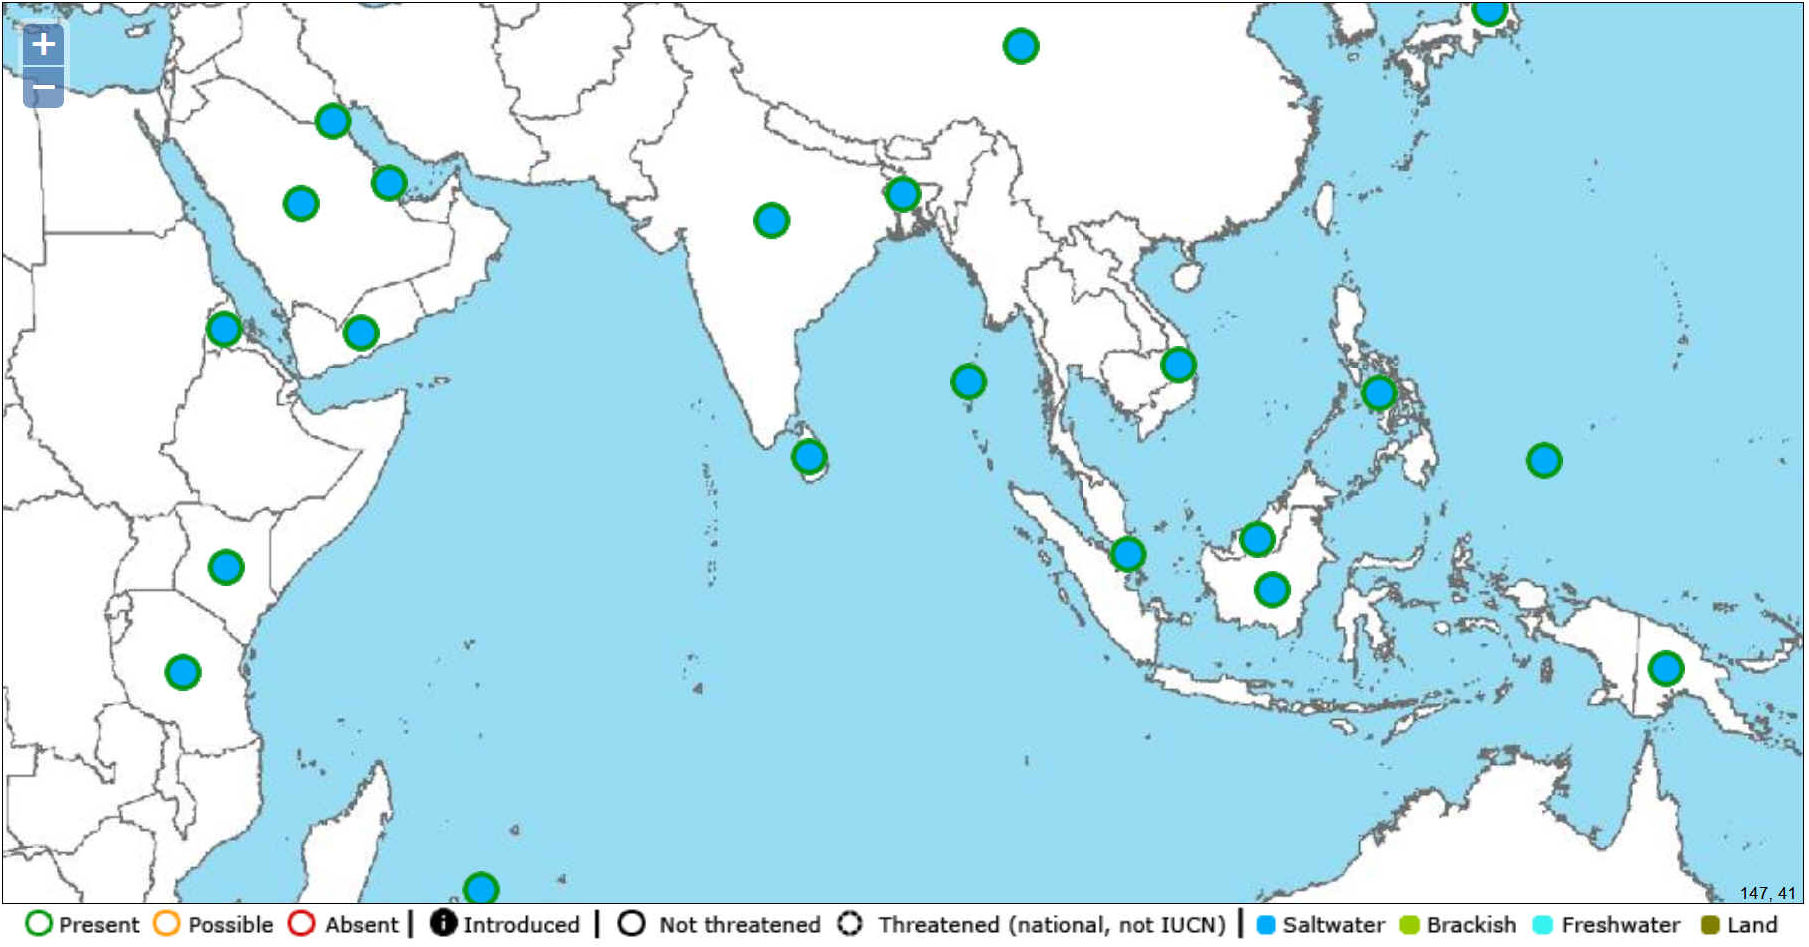 Equatorial belt in the Indian Ocean, could be breeding ground for sargassum fluitans and natans